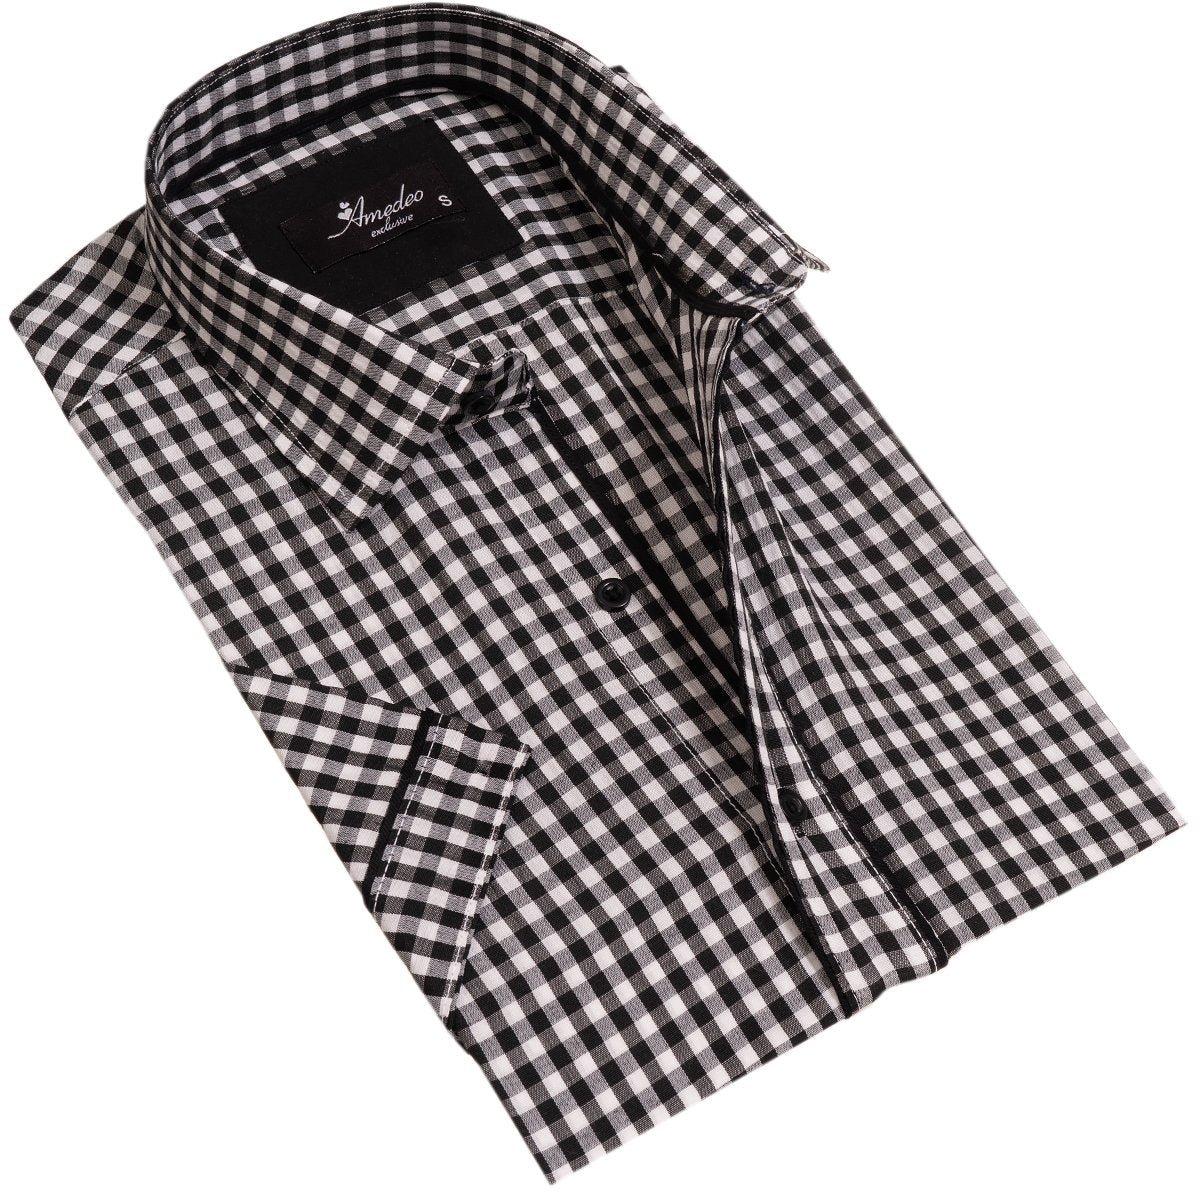 Picture of a Premium Men's Short Sleeve Button Up Shirt in Black and White product only